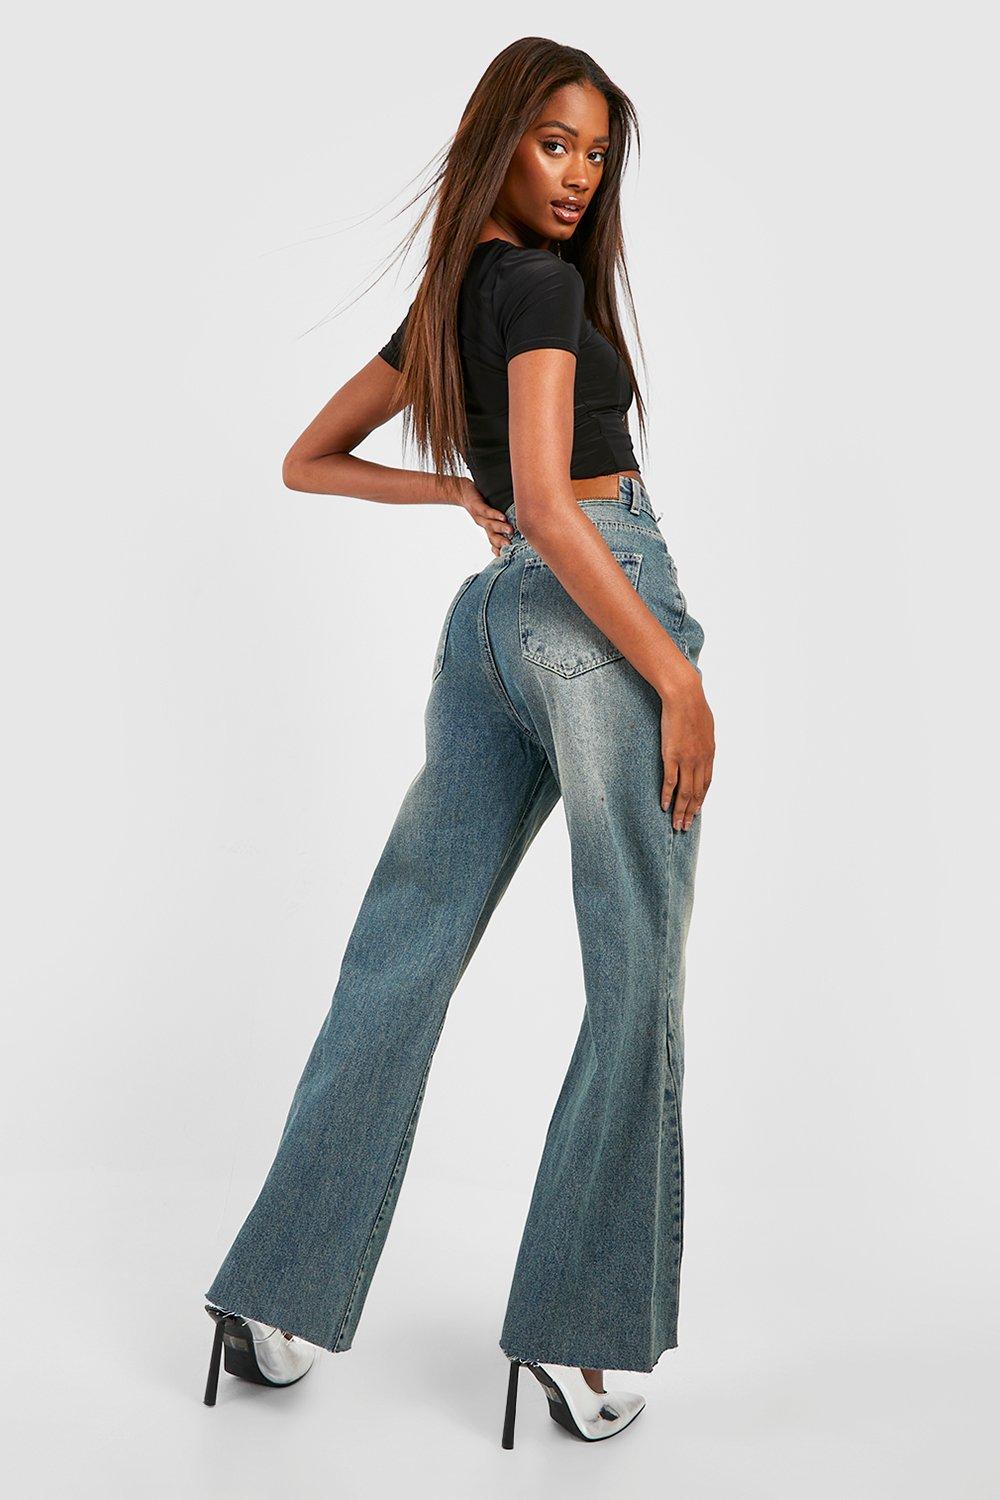 Women's Baggy Jeans in Dayle Vintage Wash